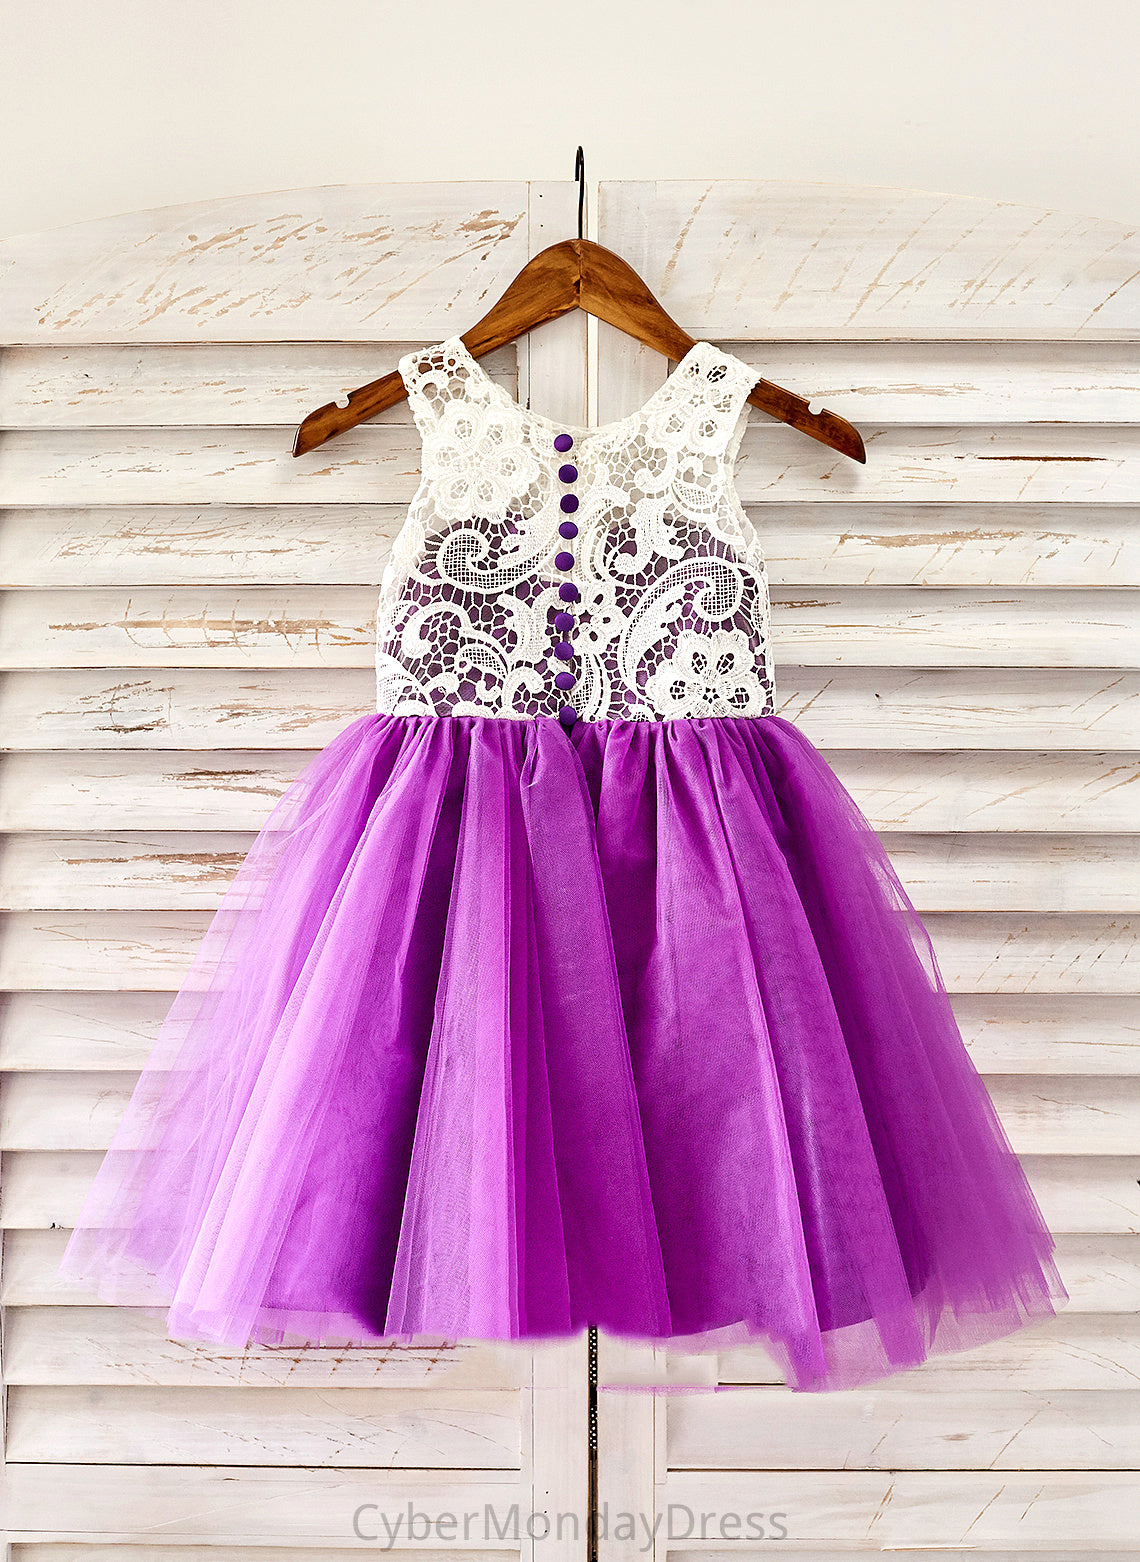 Scoop Neck With Tulle Dress A-Line Tracy Lace Flower Girl Dresses Girl - Knee-length Flower Sleeveless